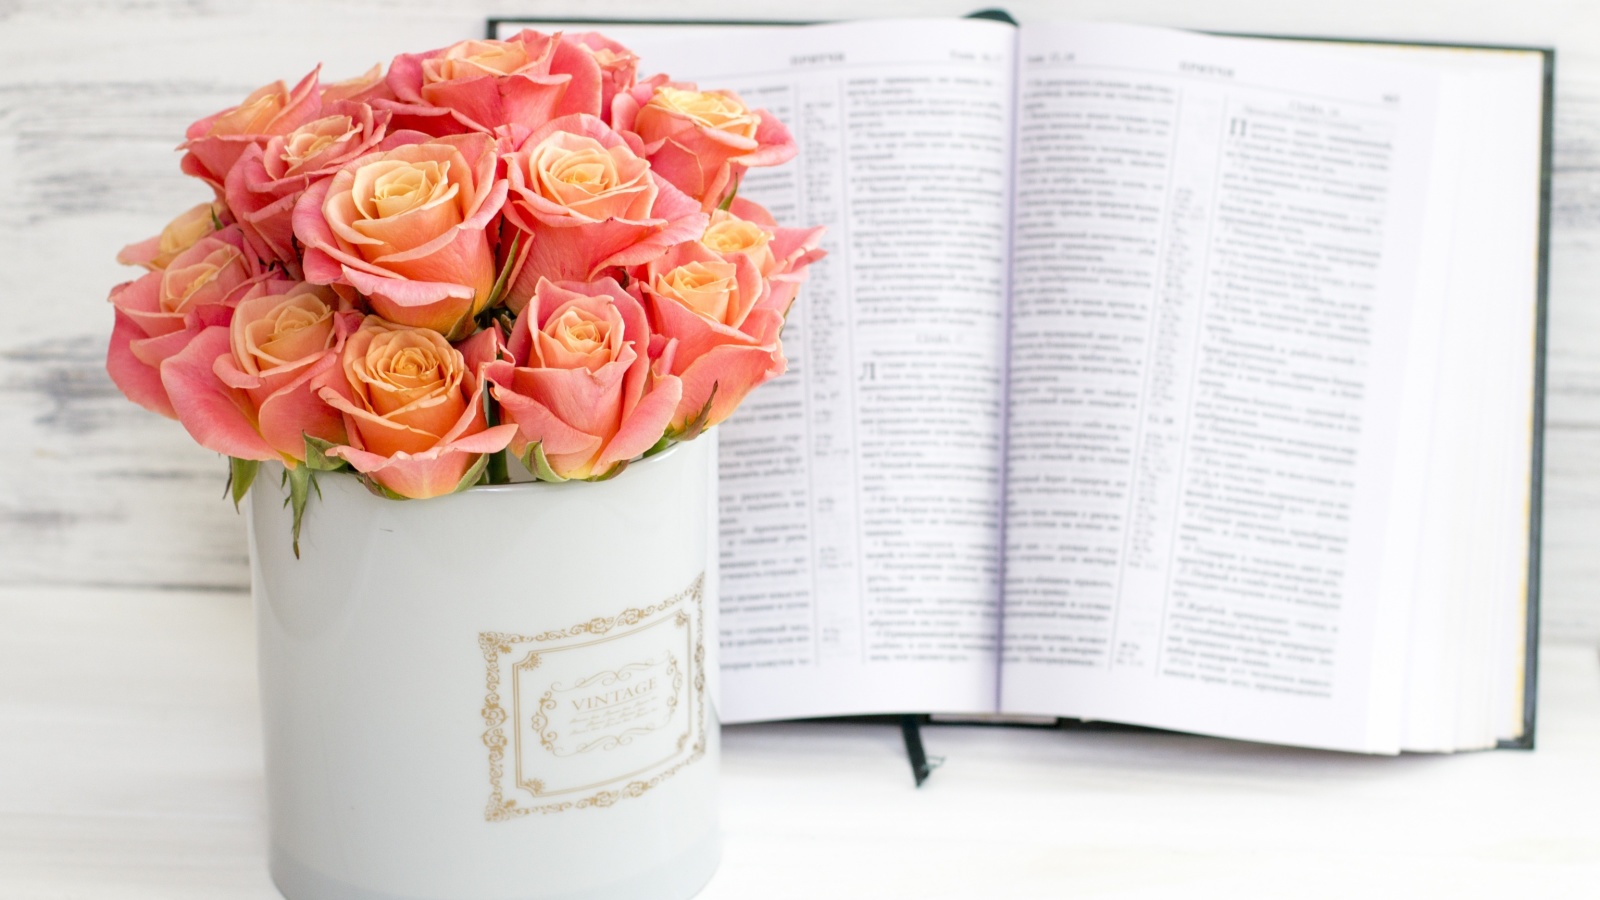 Roses and Book wallpaper 1600x900